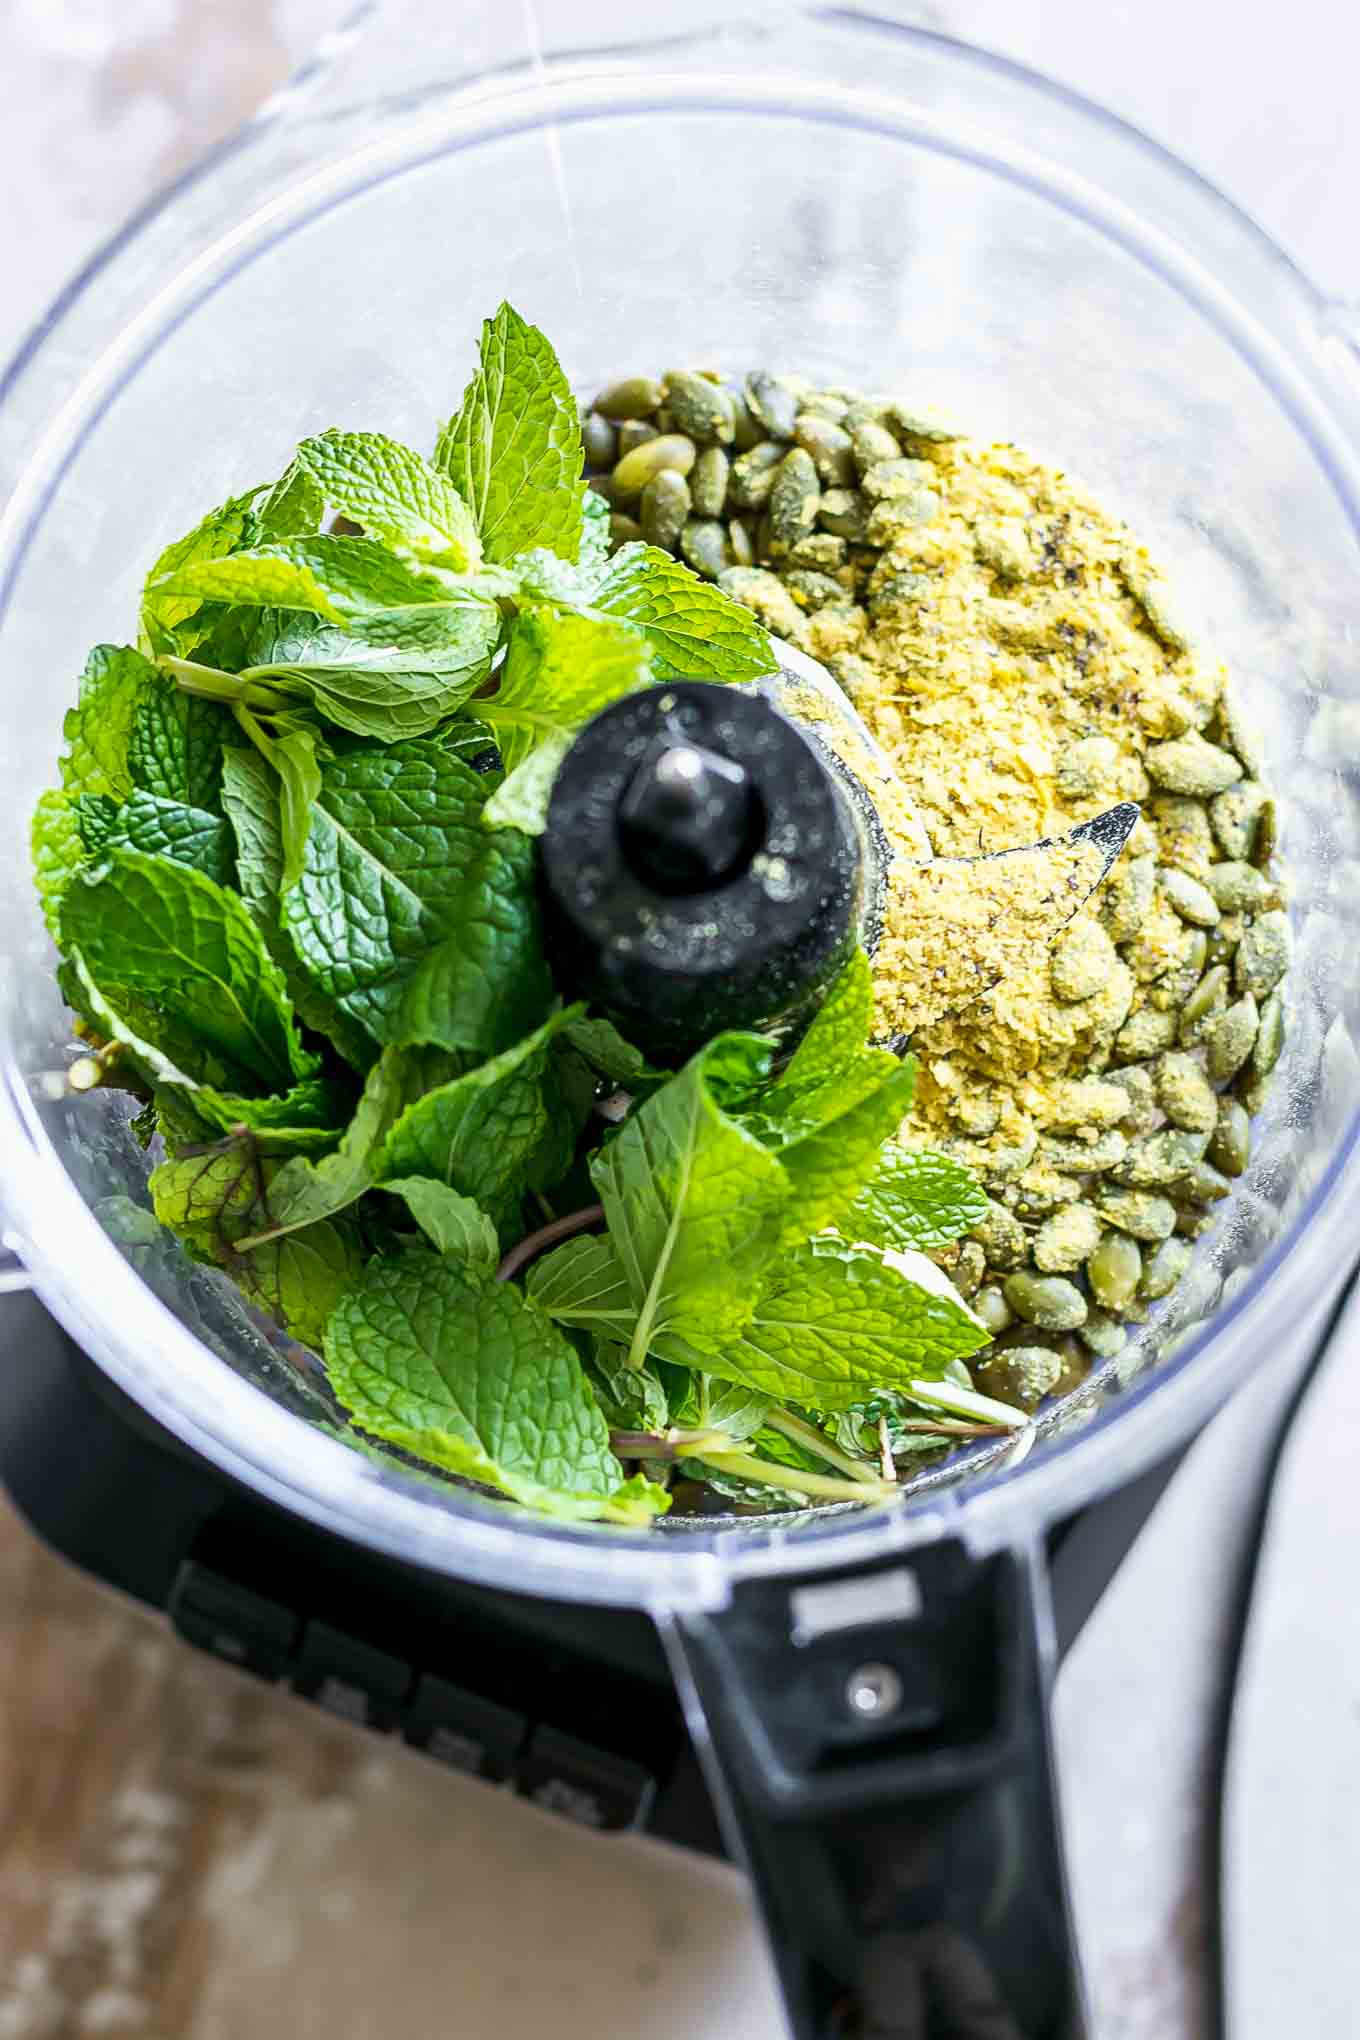 mint leaves with pesto ingredients in a food processor before blending